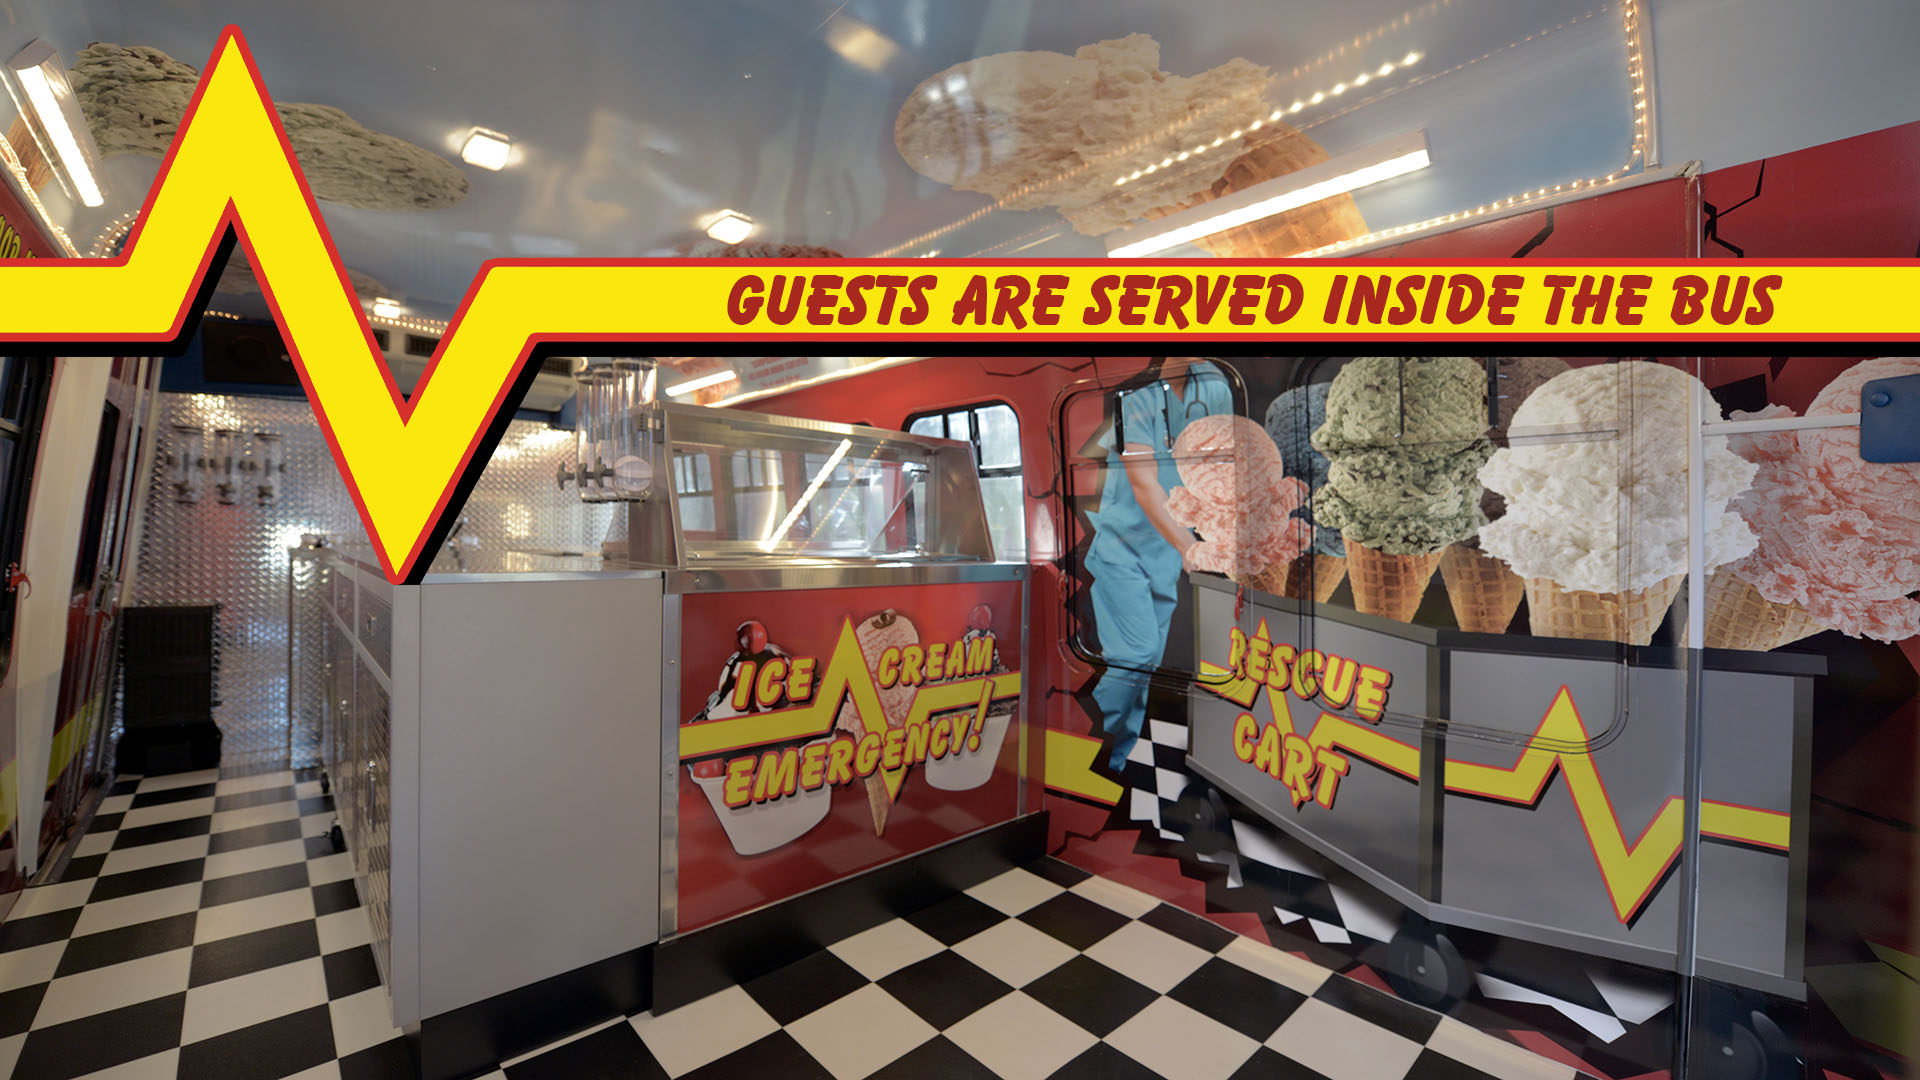 Guests are Served Inside the Ice Cream Catering Truck